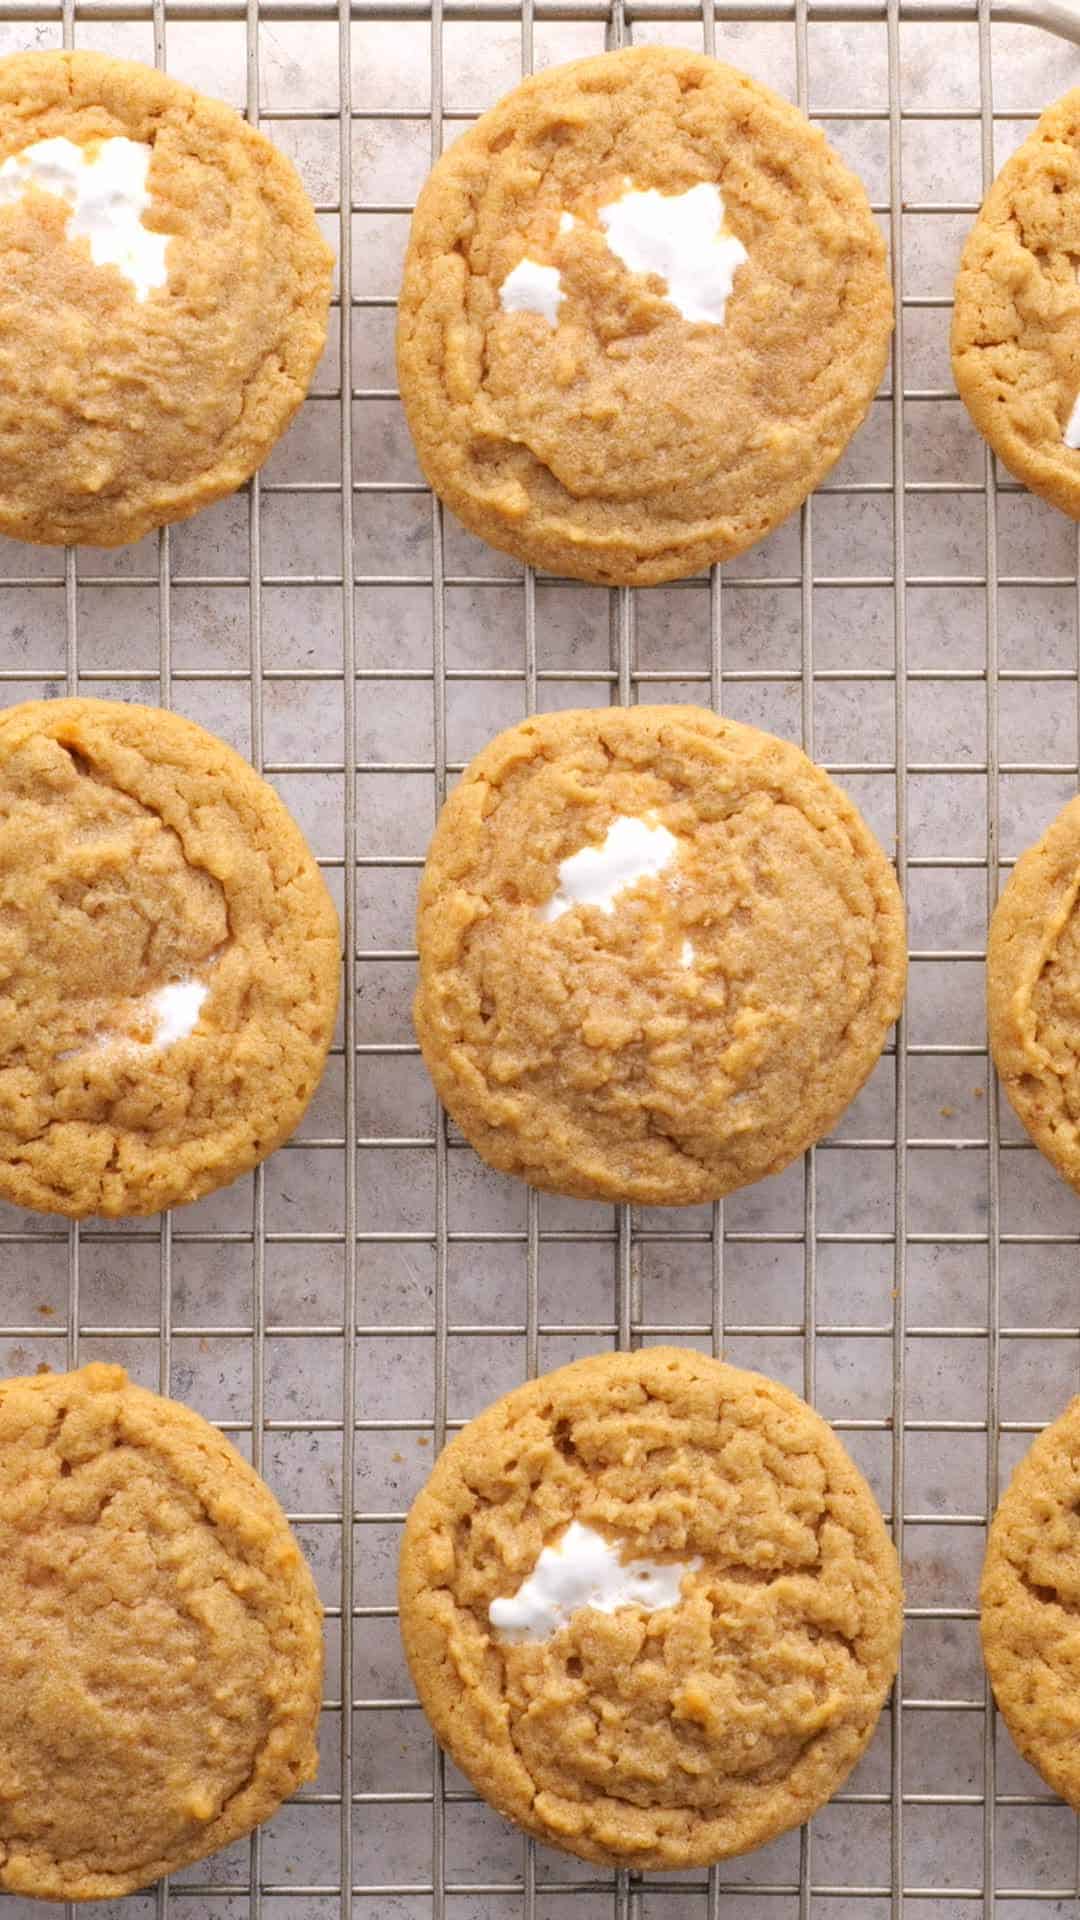 Peanut butter and marshmallow fluffernutter cookies on a wire rack